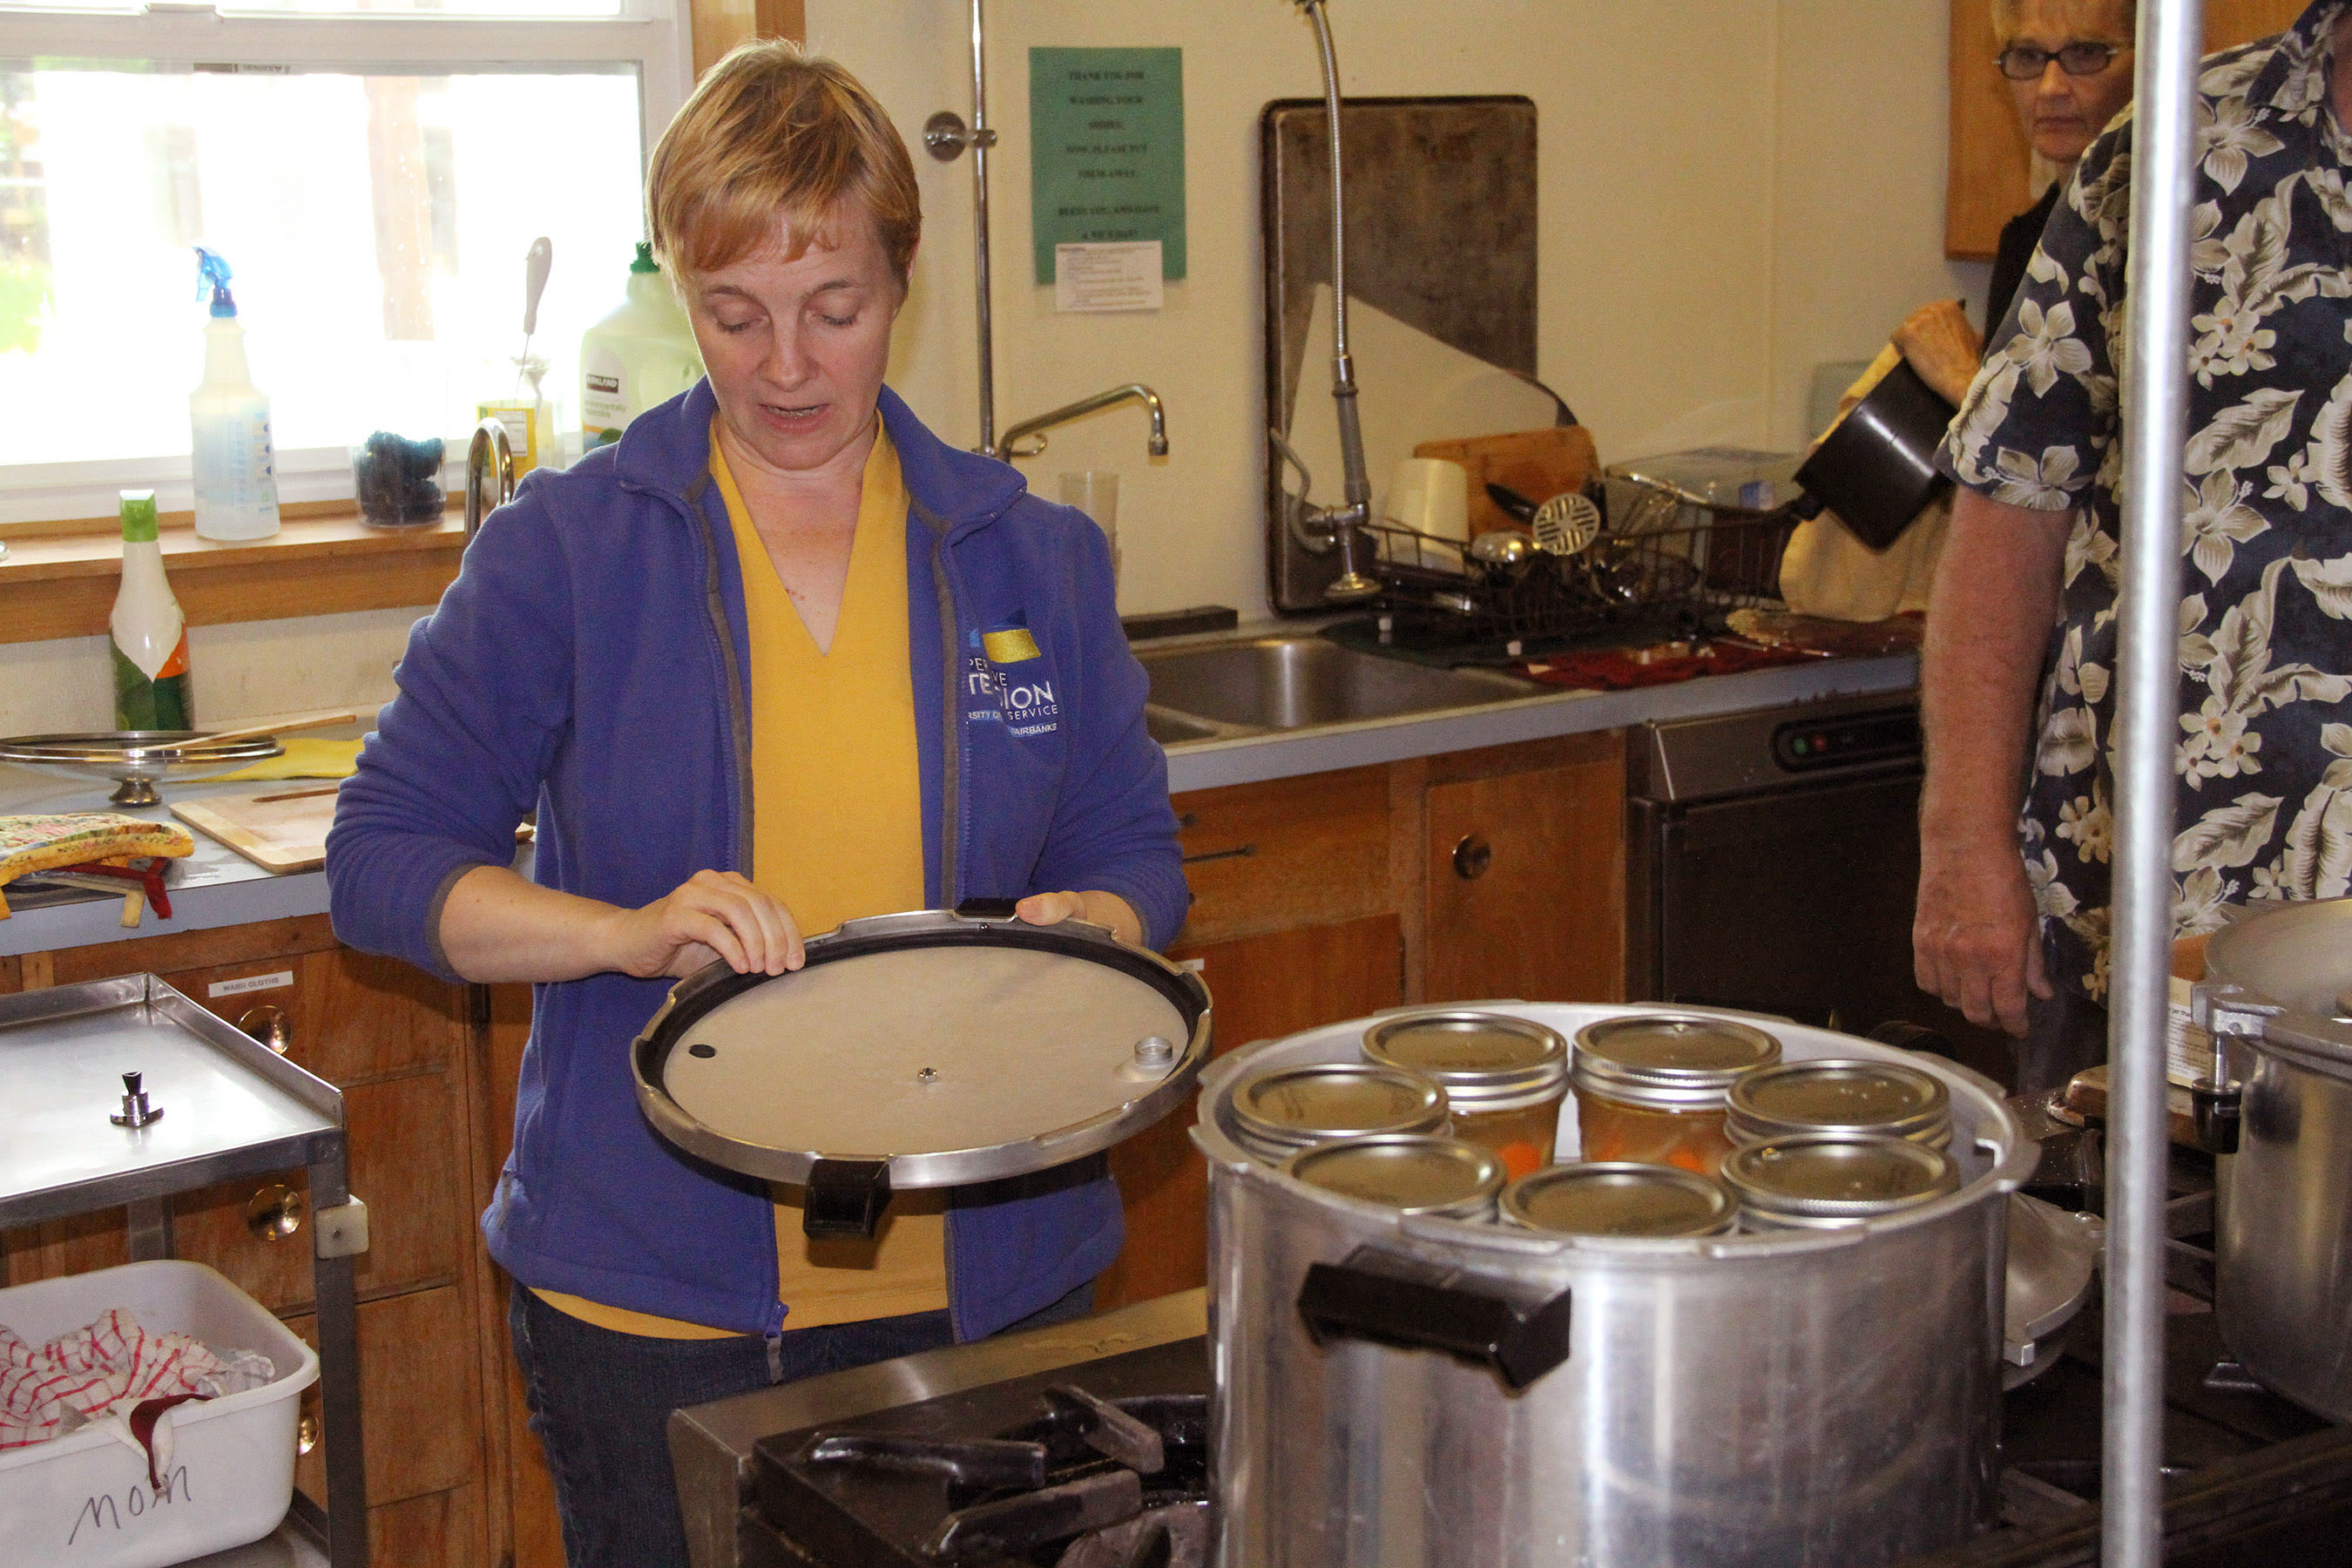 Sarah Lewis teaches a Sitka canning class how to put on a pressure canner lid and make sure the vent is clear and the gasket undamaged. She was canning soups and sauces. Photo by Charles Bingham for the Sitka Kitch